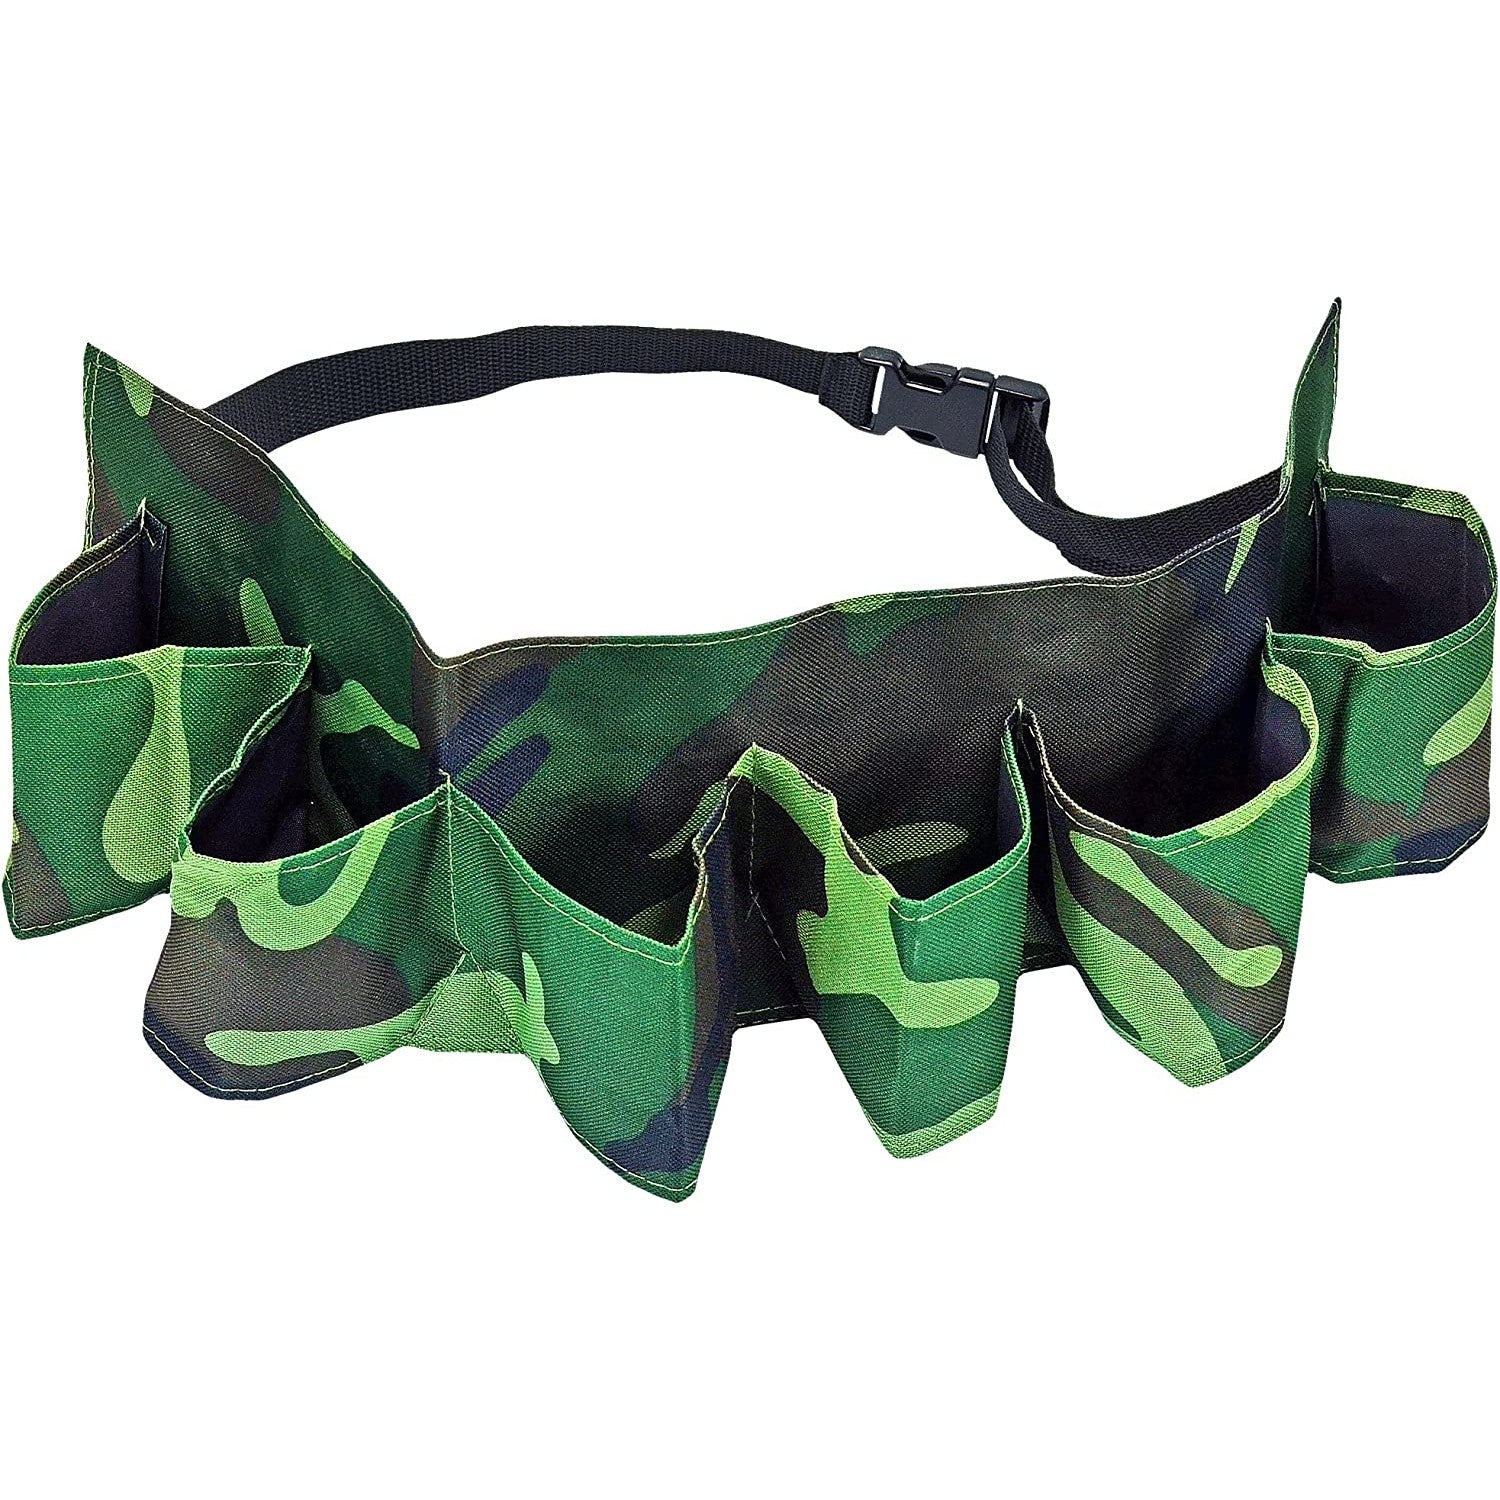 A green camouflage beer belt which features 6 pockets in the front to hold 6 cans of beer or soda.